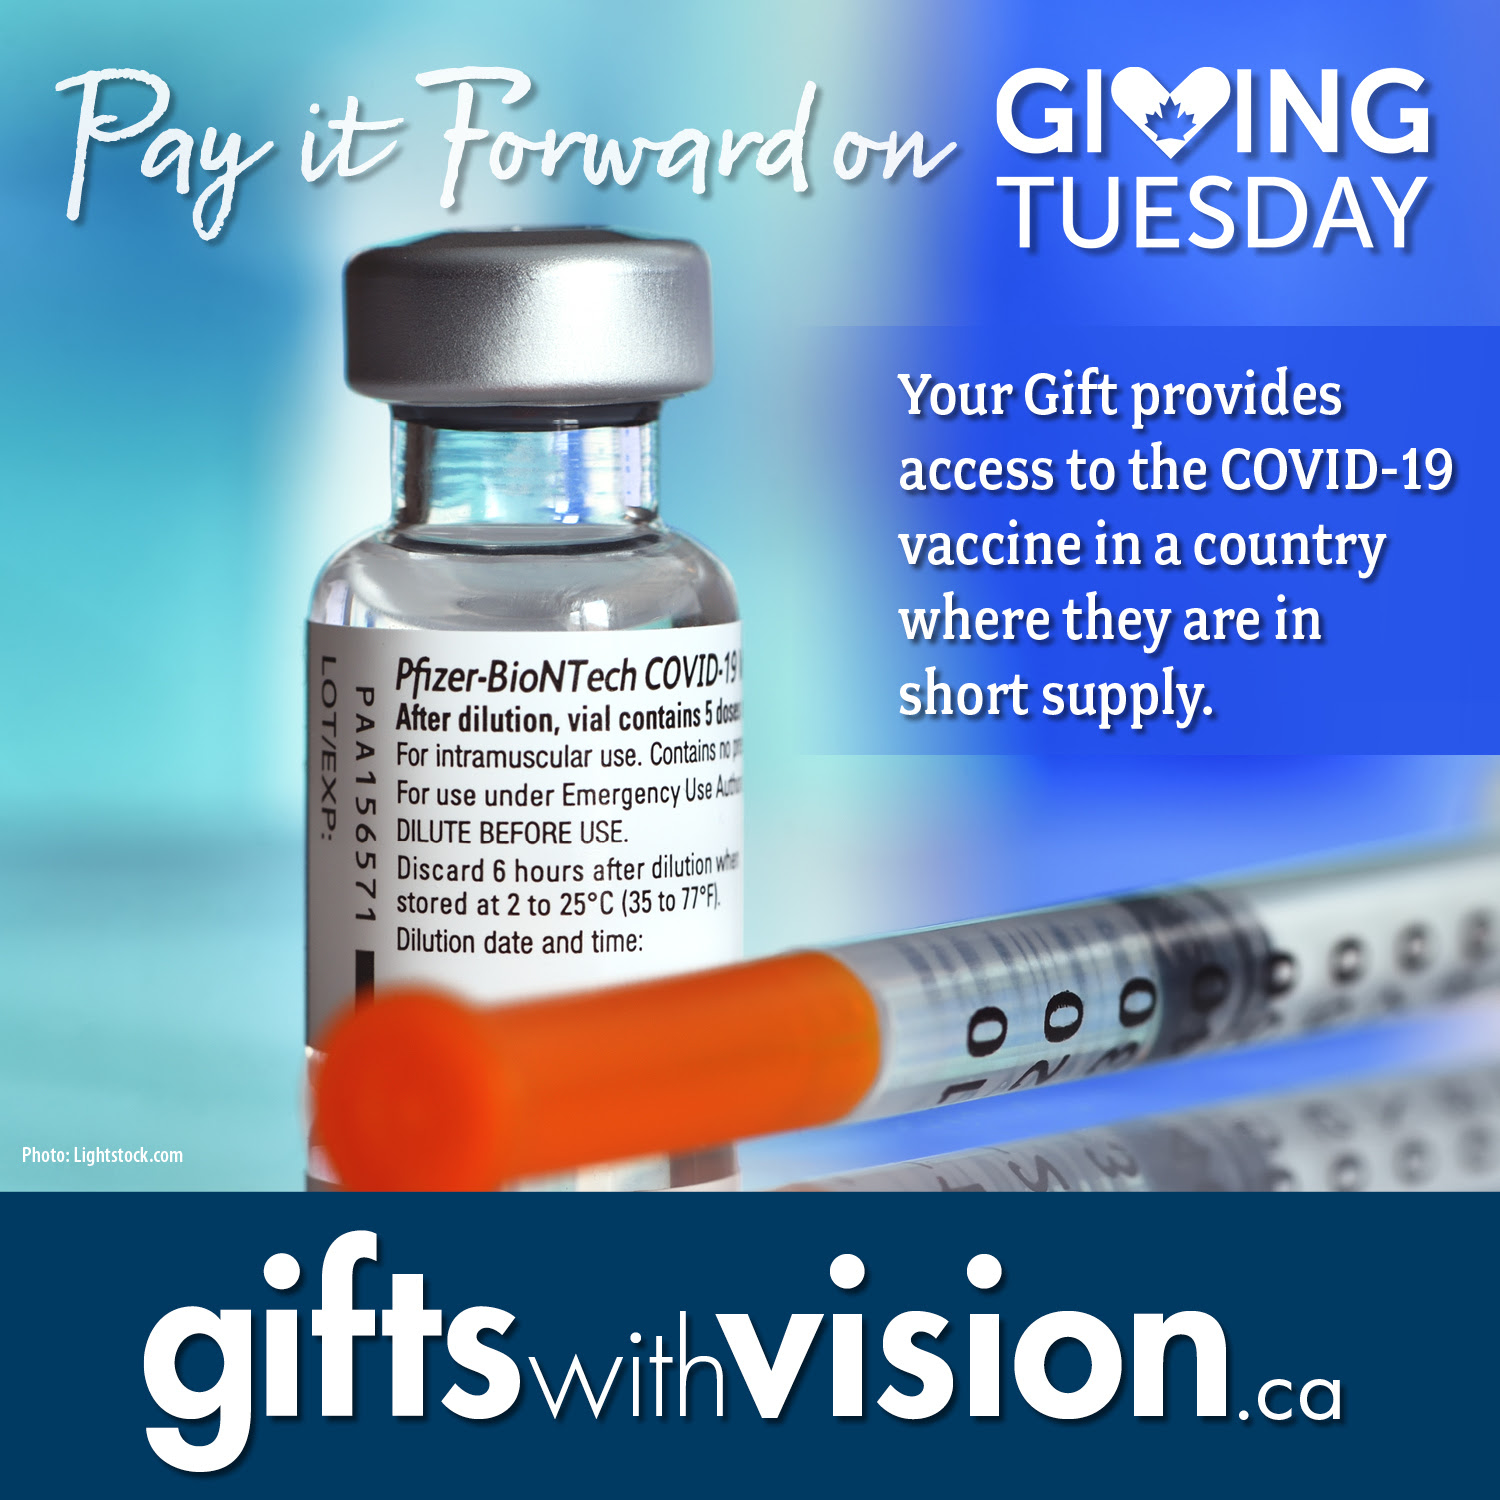 Image showing a vial of the COVID-19 vaccine and a syringe, with "Pay it Forward" and "Gifts with Vision" in white letters.